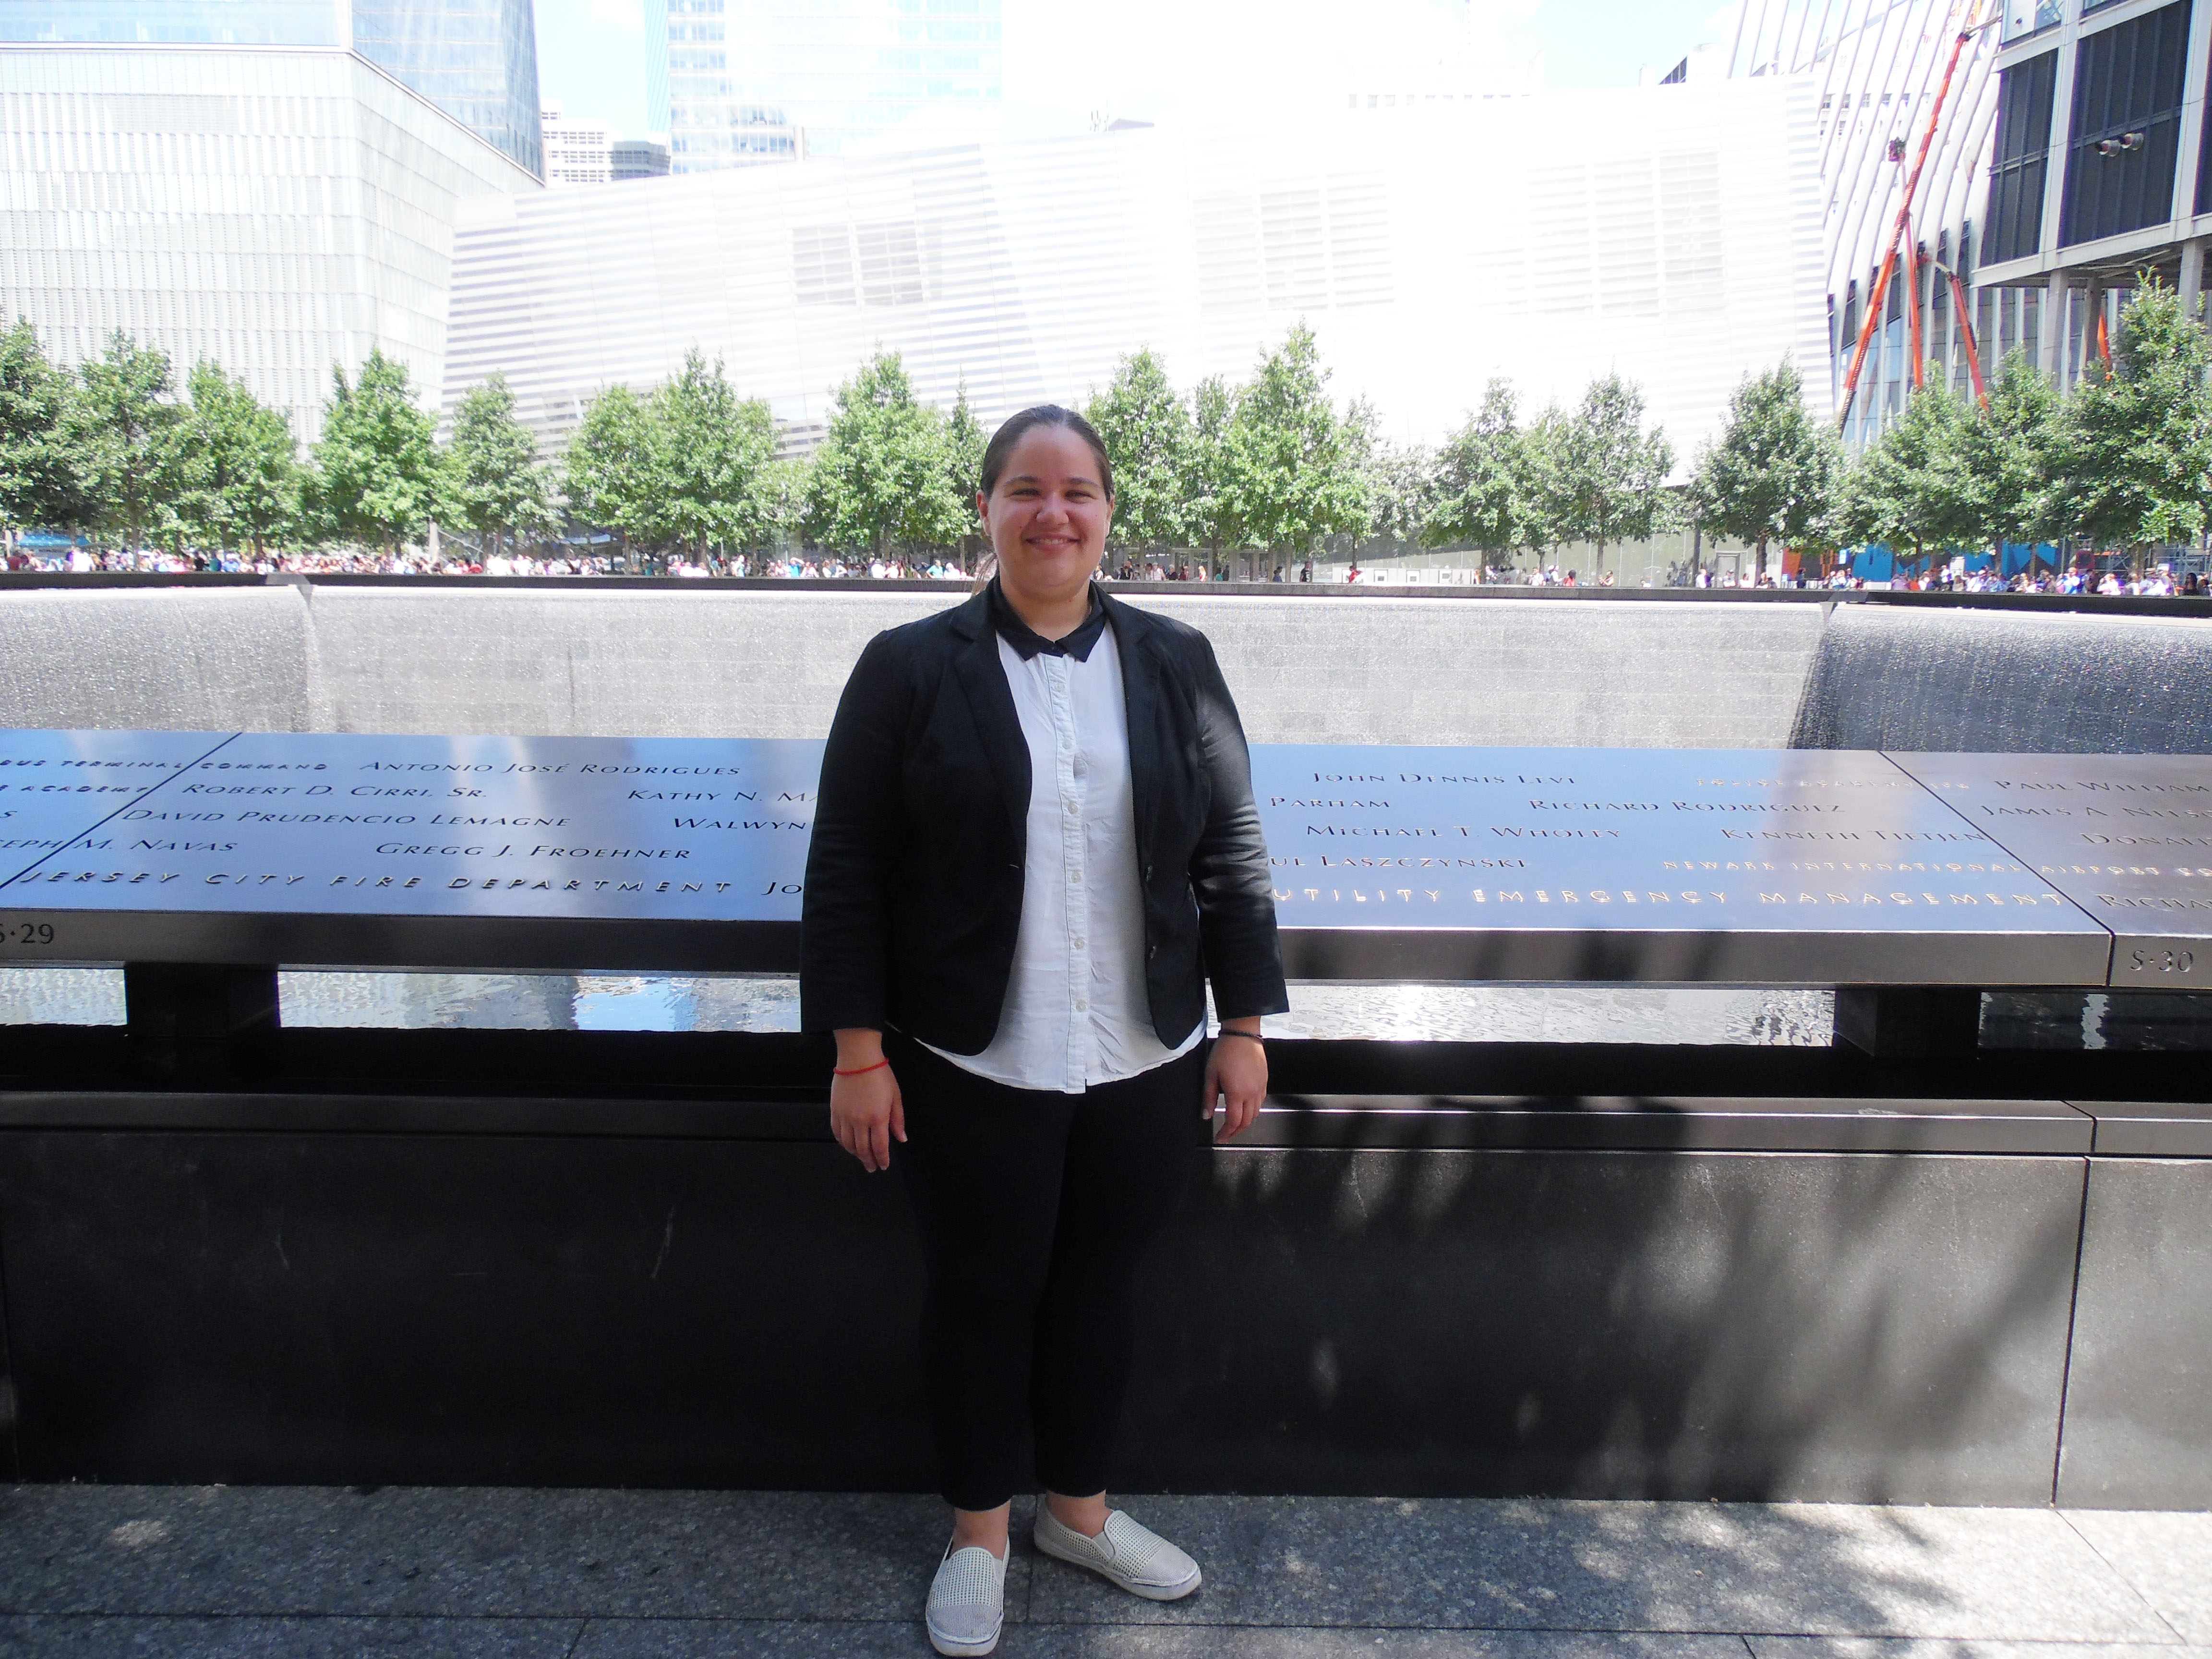 Exhibitions intern Chelsea Levine stands beside the south reflecting pool on the 9/11 Memorial plaza.